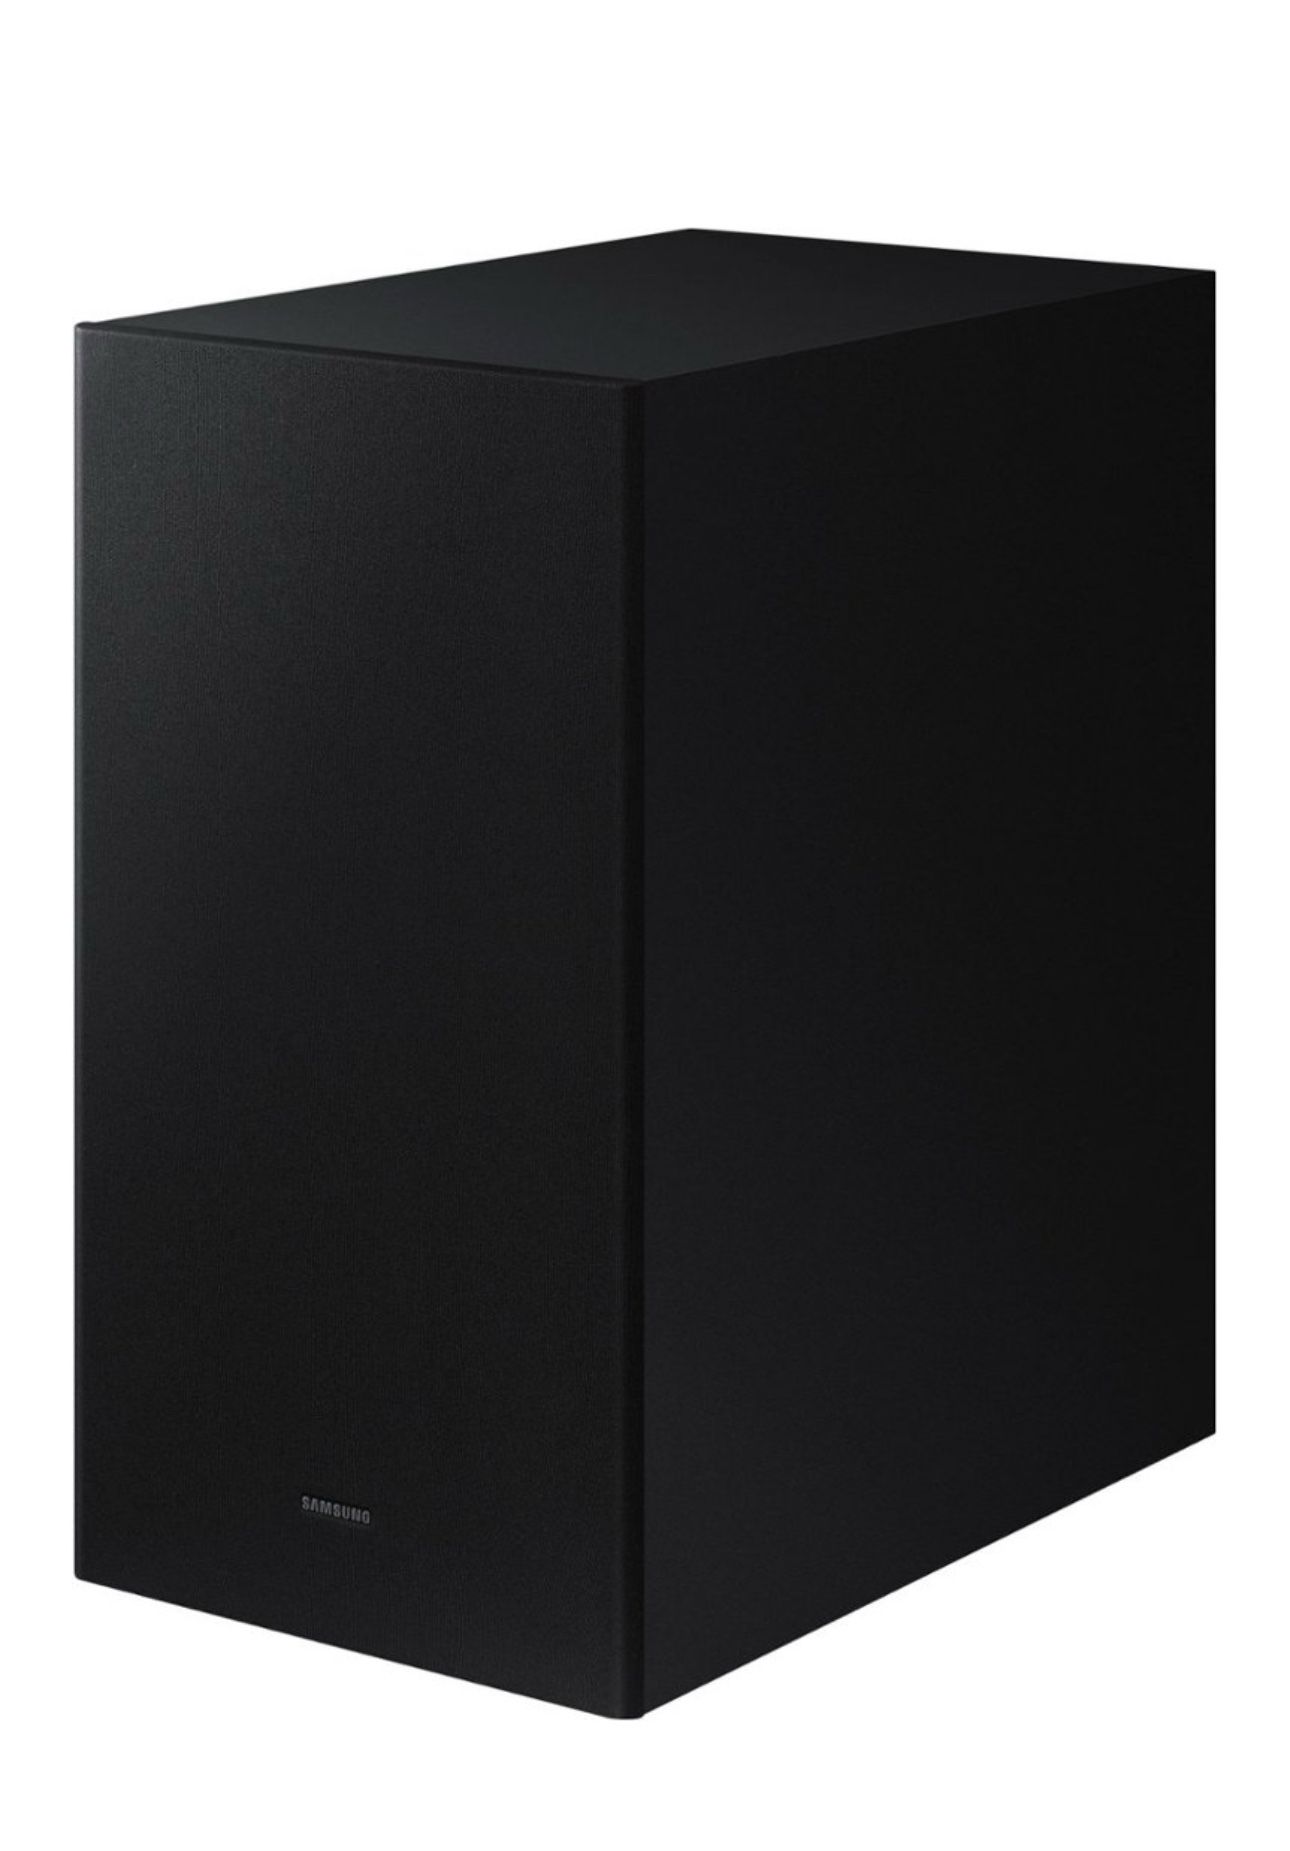 *NEED IT GONE!* Samsung B650 Subwoofer